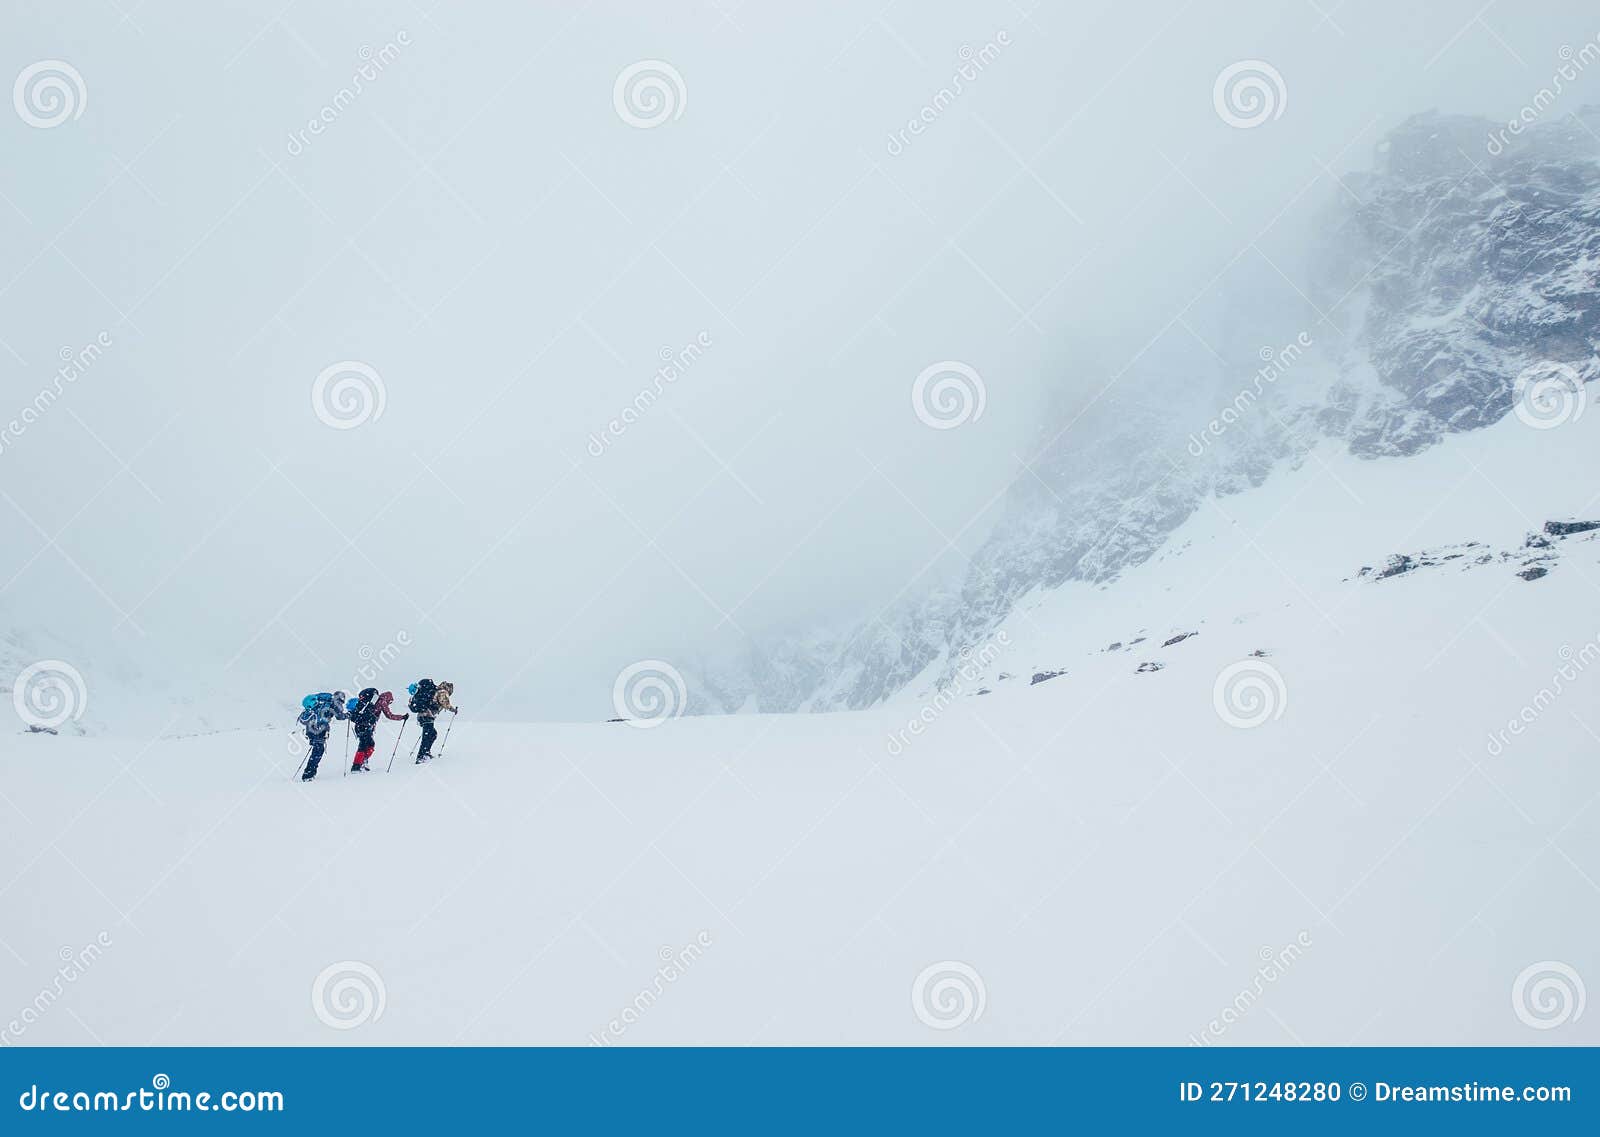 three members rope team ascending the high mountain winter peak. blizard covering the structural basin in vysoke tatry (high